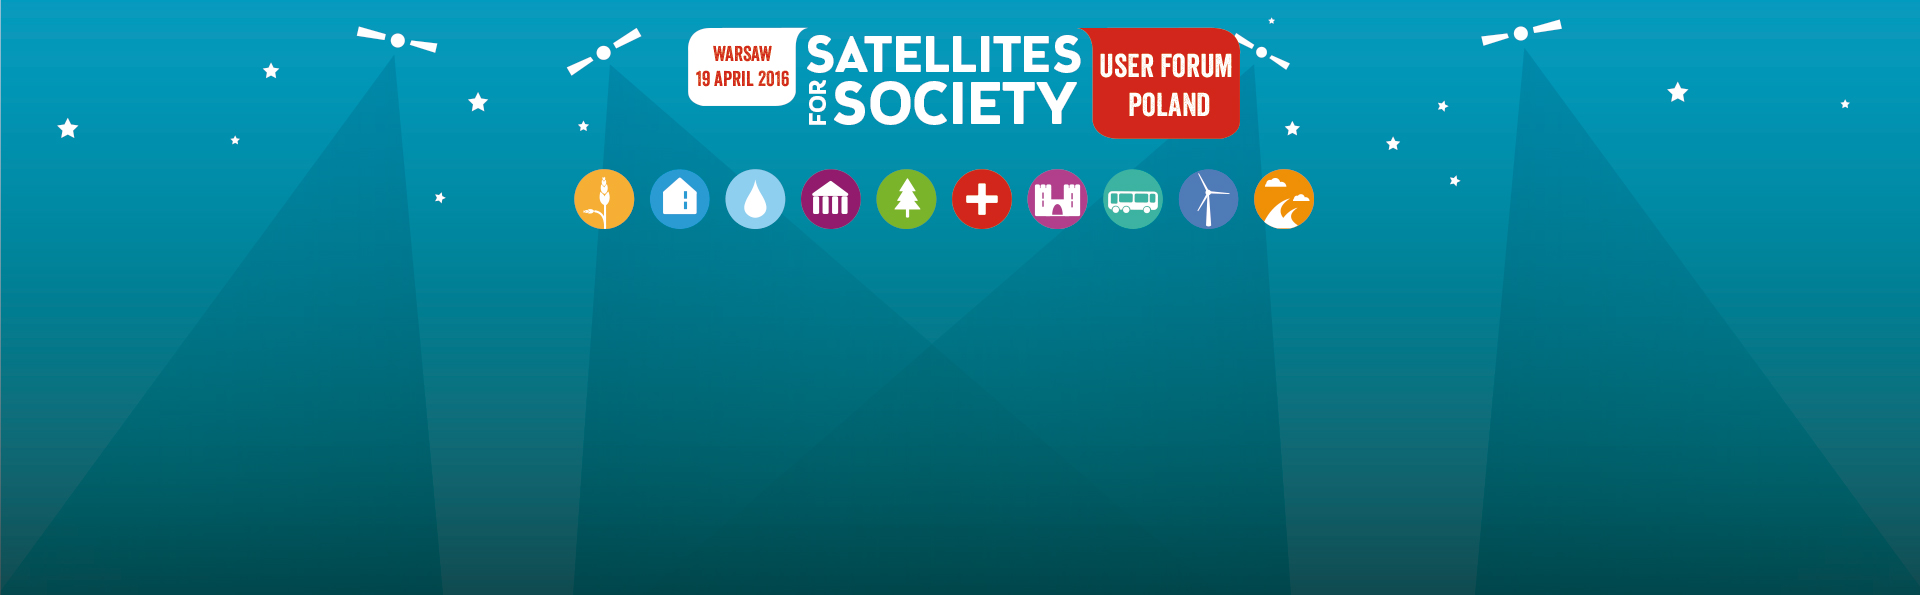 Poland User Forum “Satellites for society: operational uses of satellite-based services by the Polish public administration”